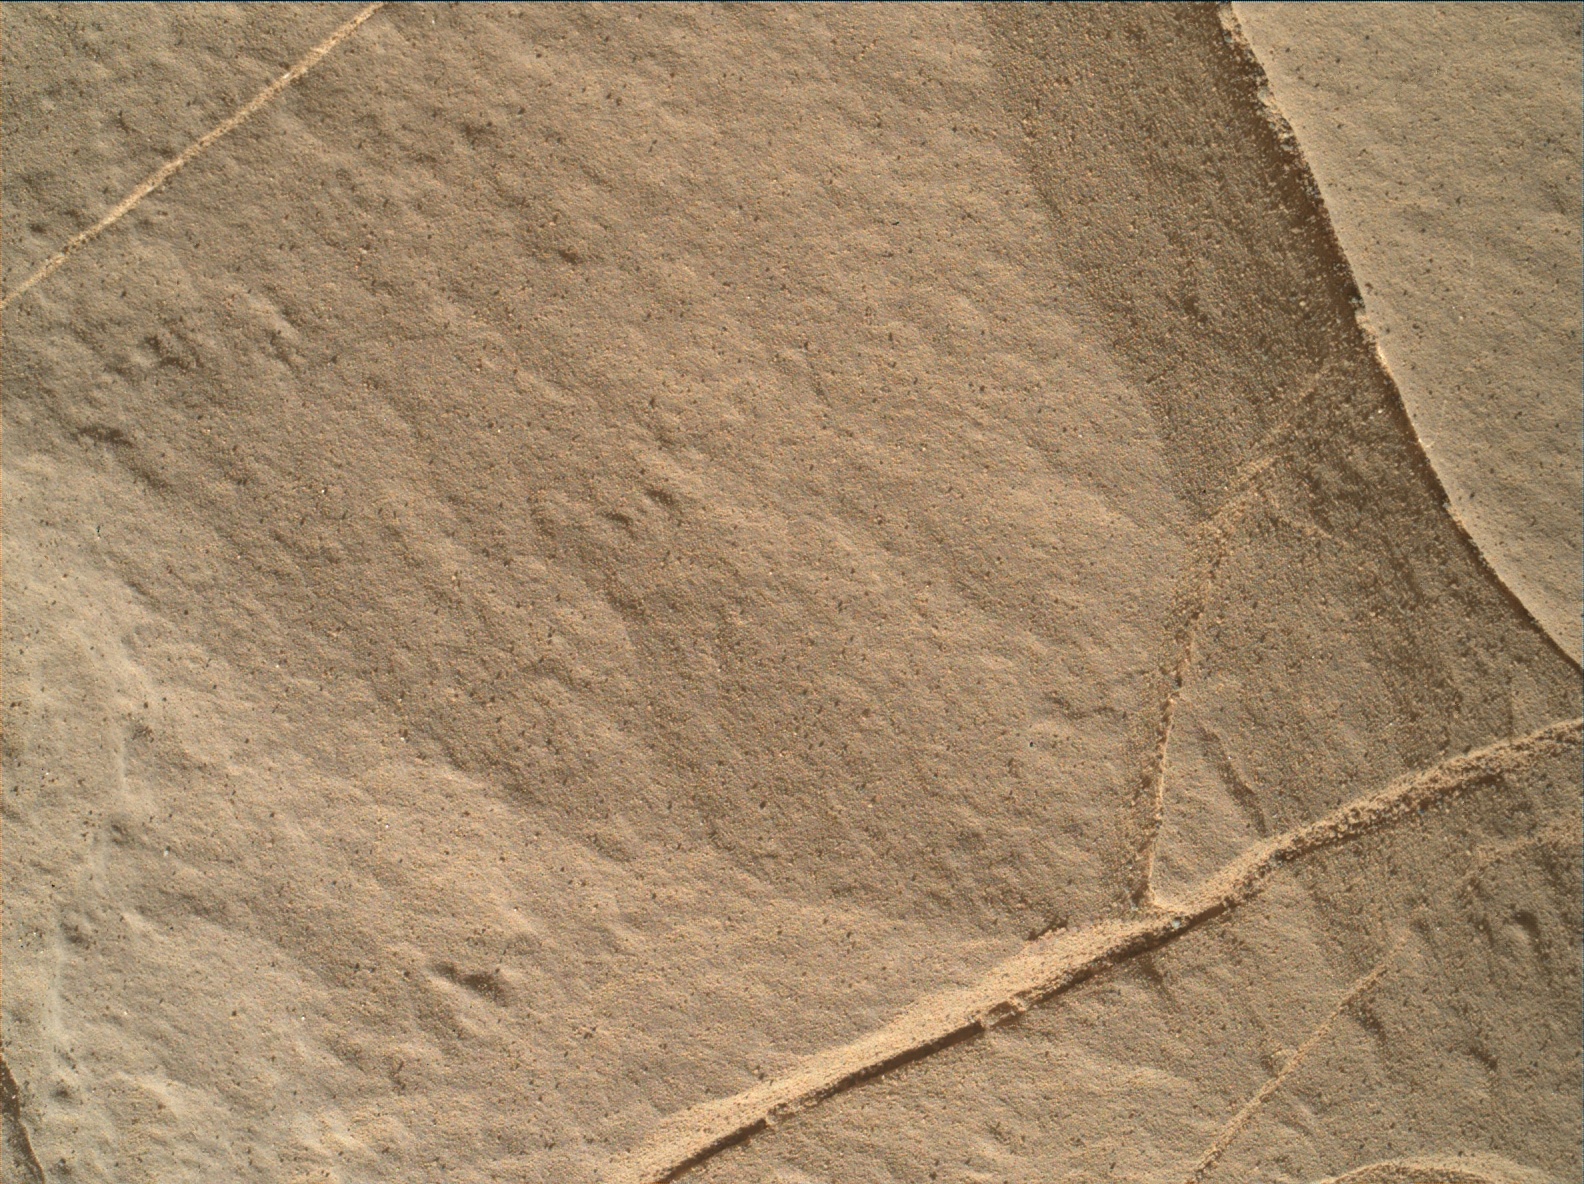 Nasa's Mars rover Curiosity acquired this image using its Mars Hand Lens Imager (MAHLI) on Sol 1826